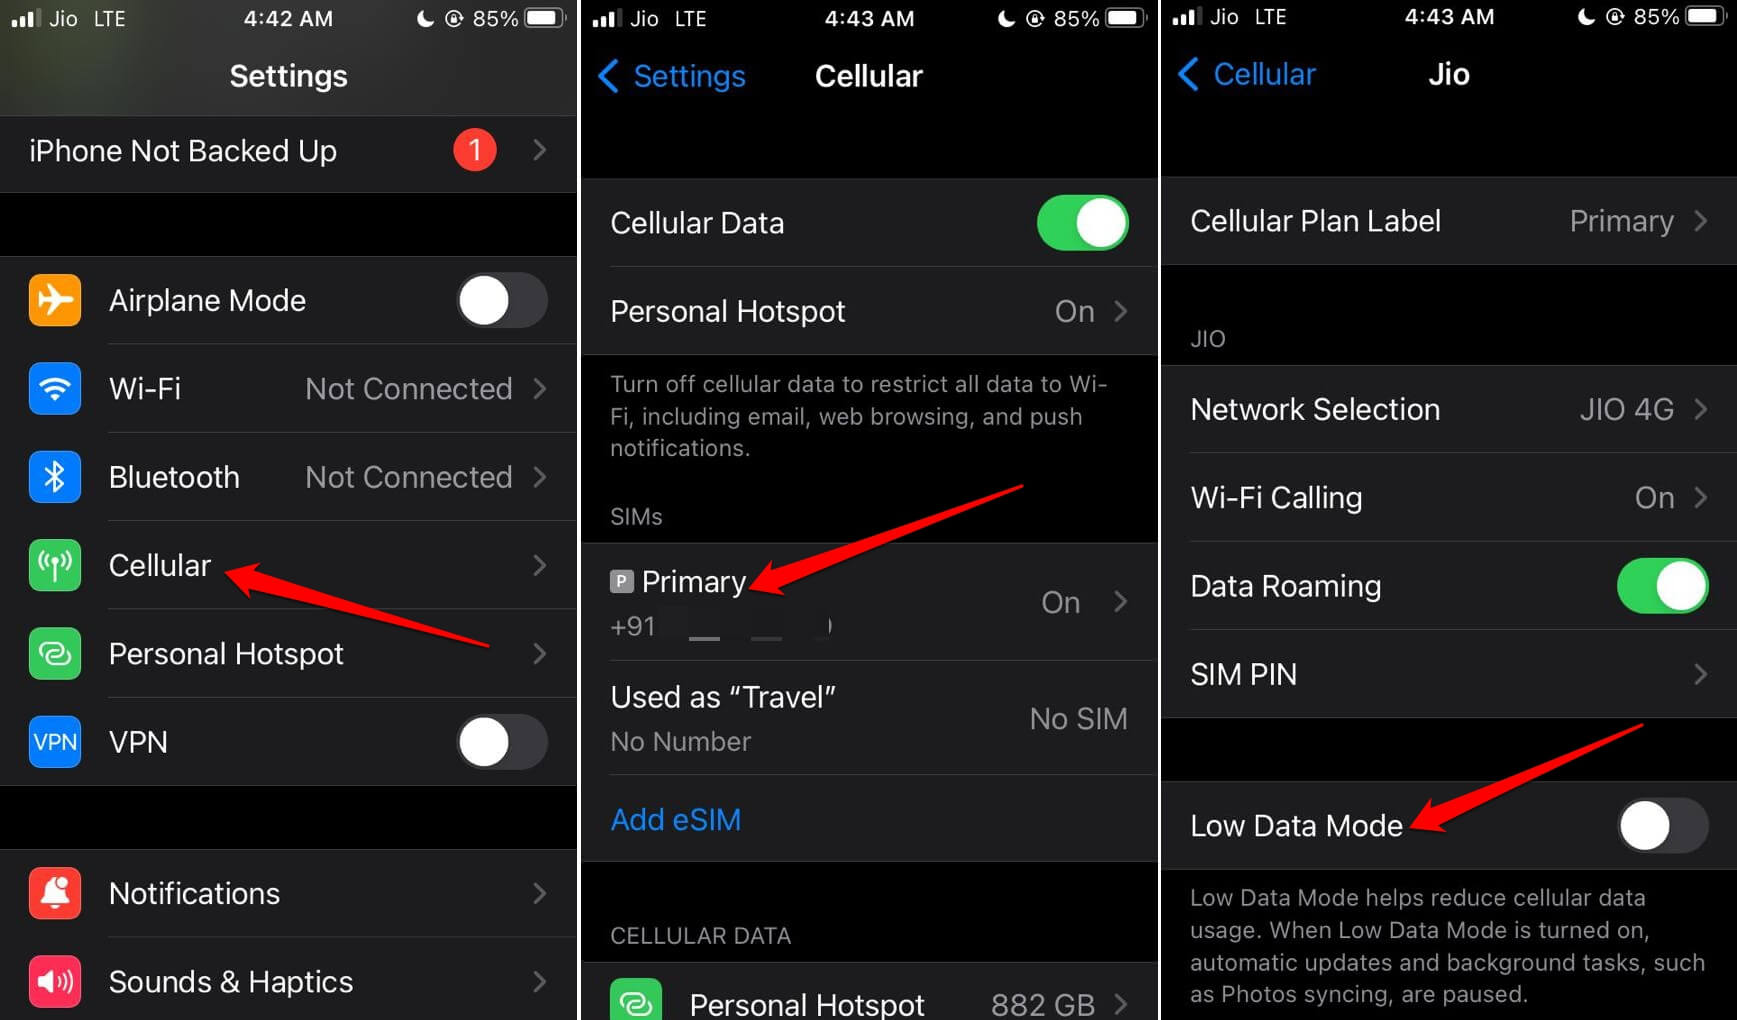 disable low data mode on iPhone